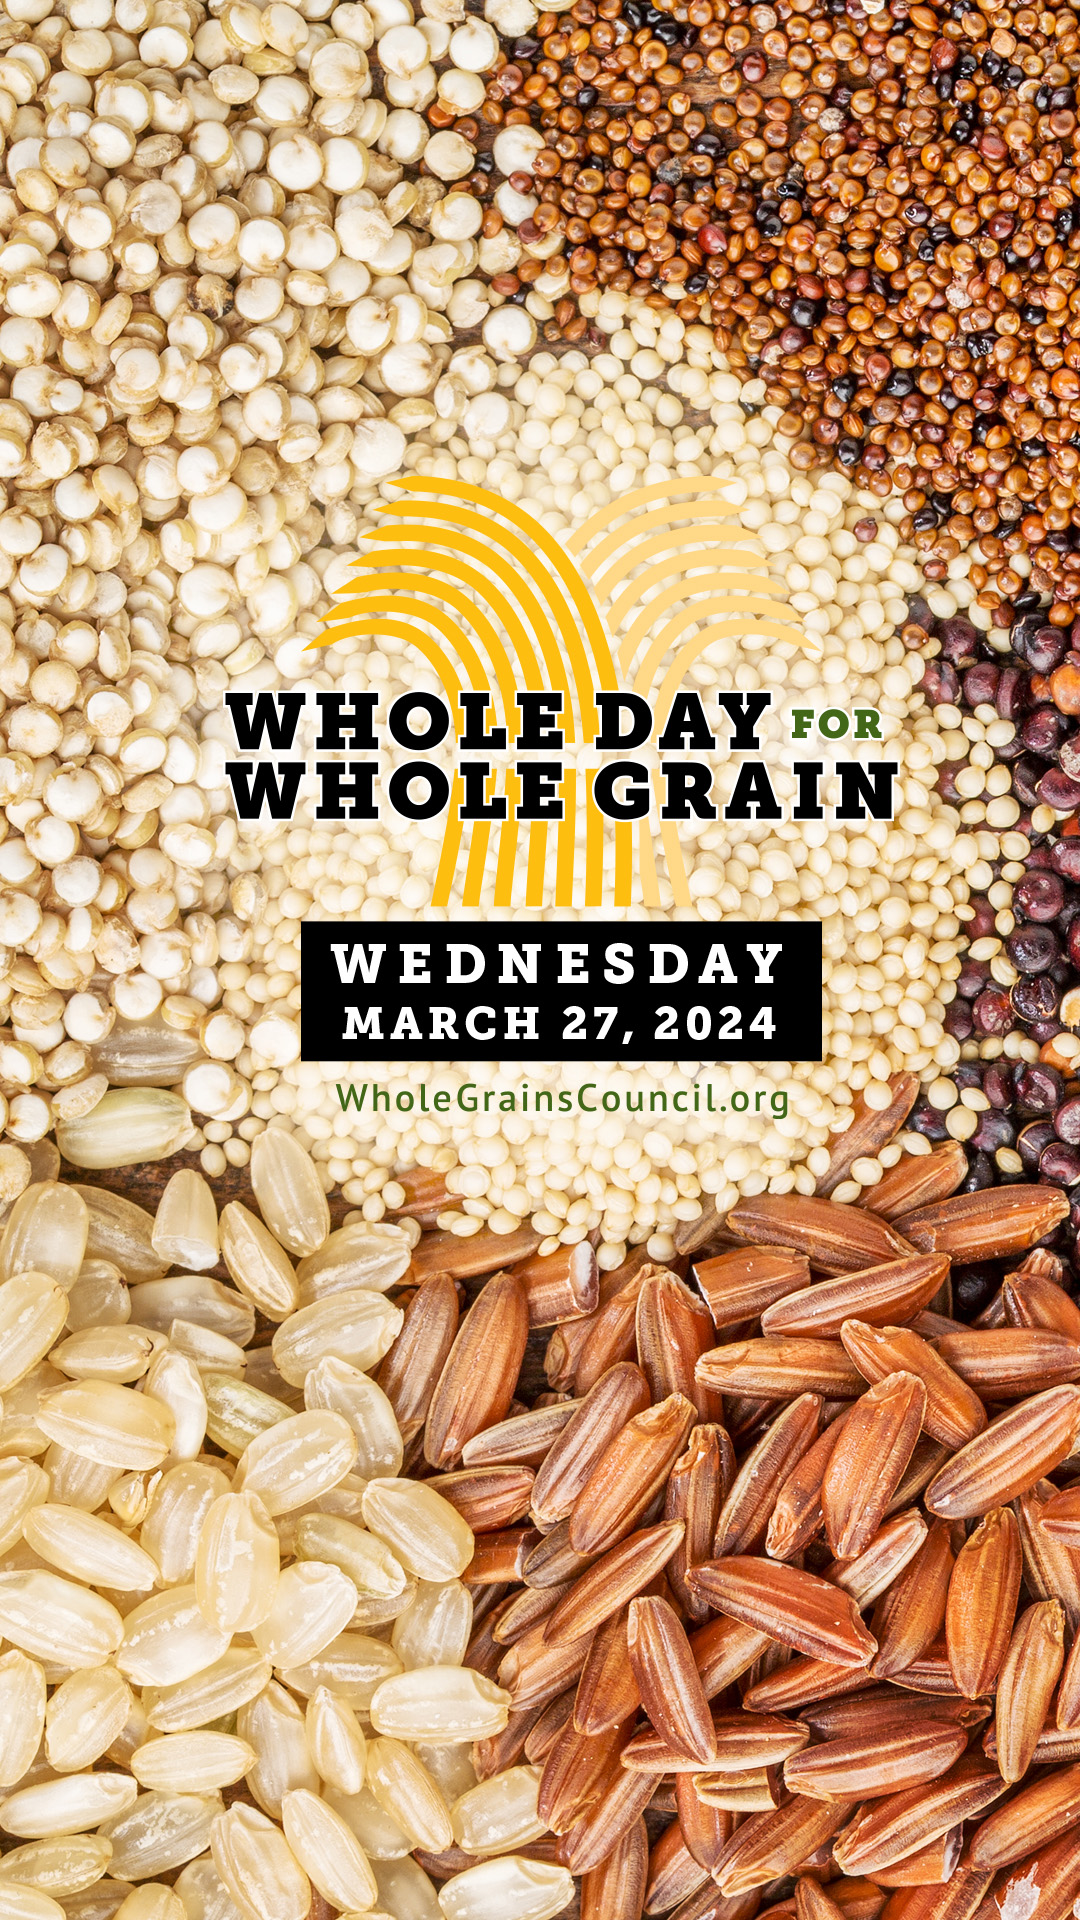 Whole Day for Whole Grain logo with date